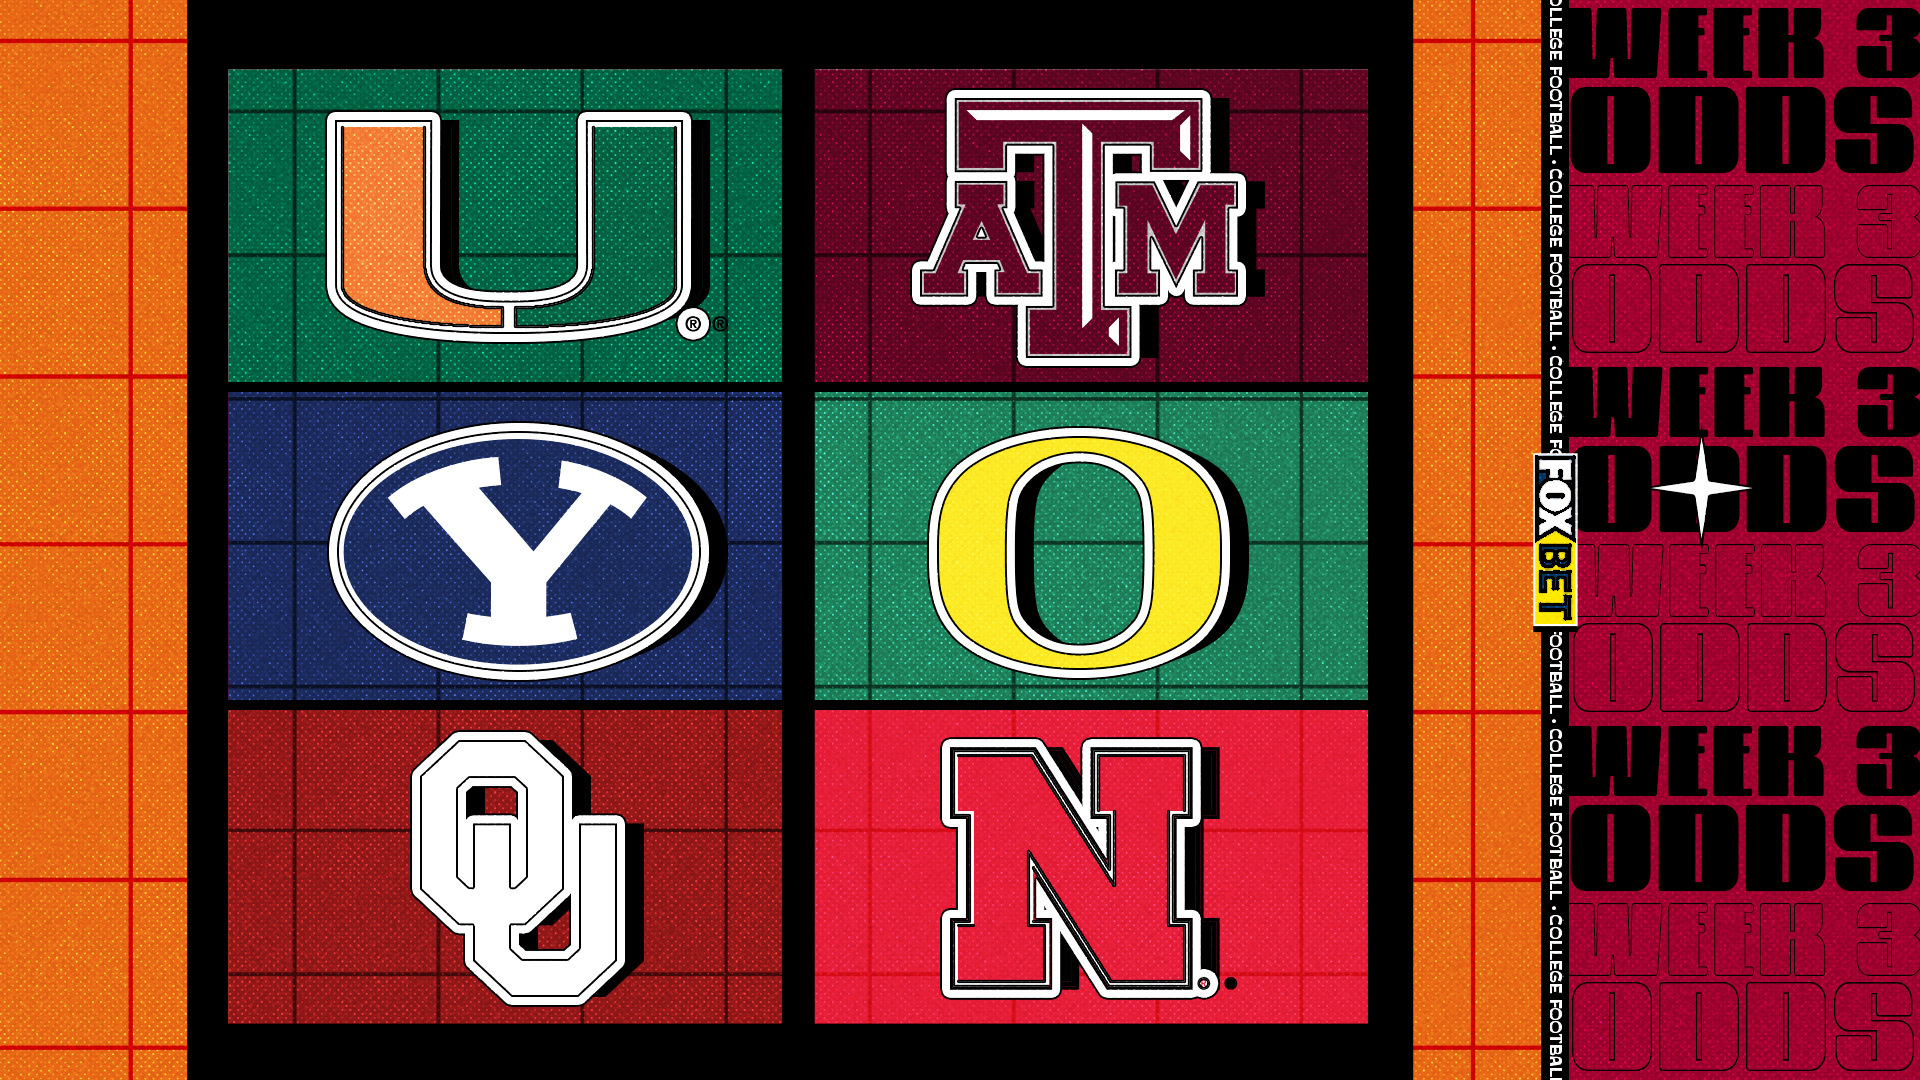 top 25 college football odds